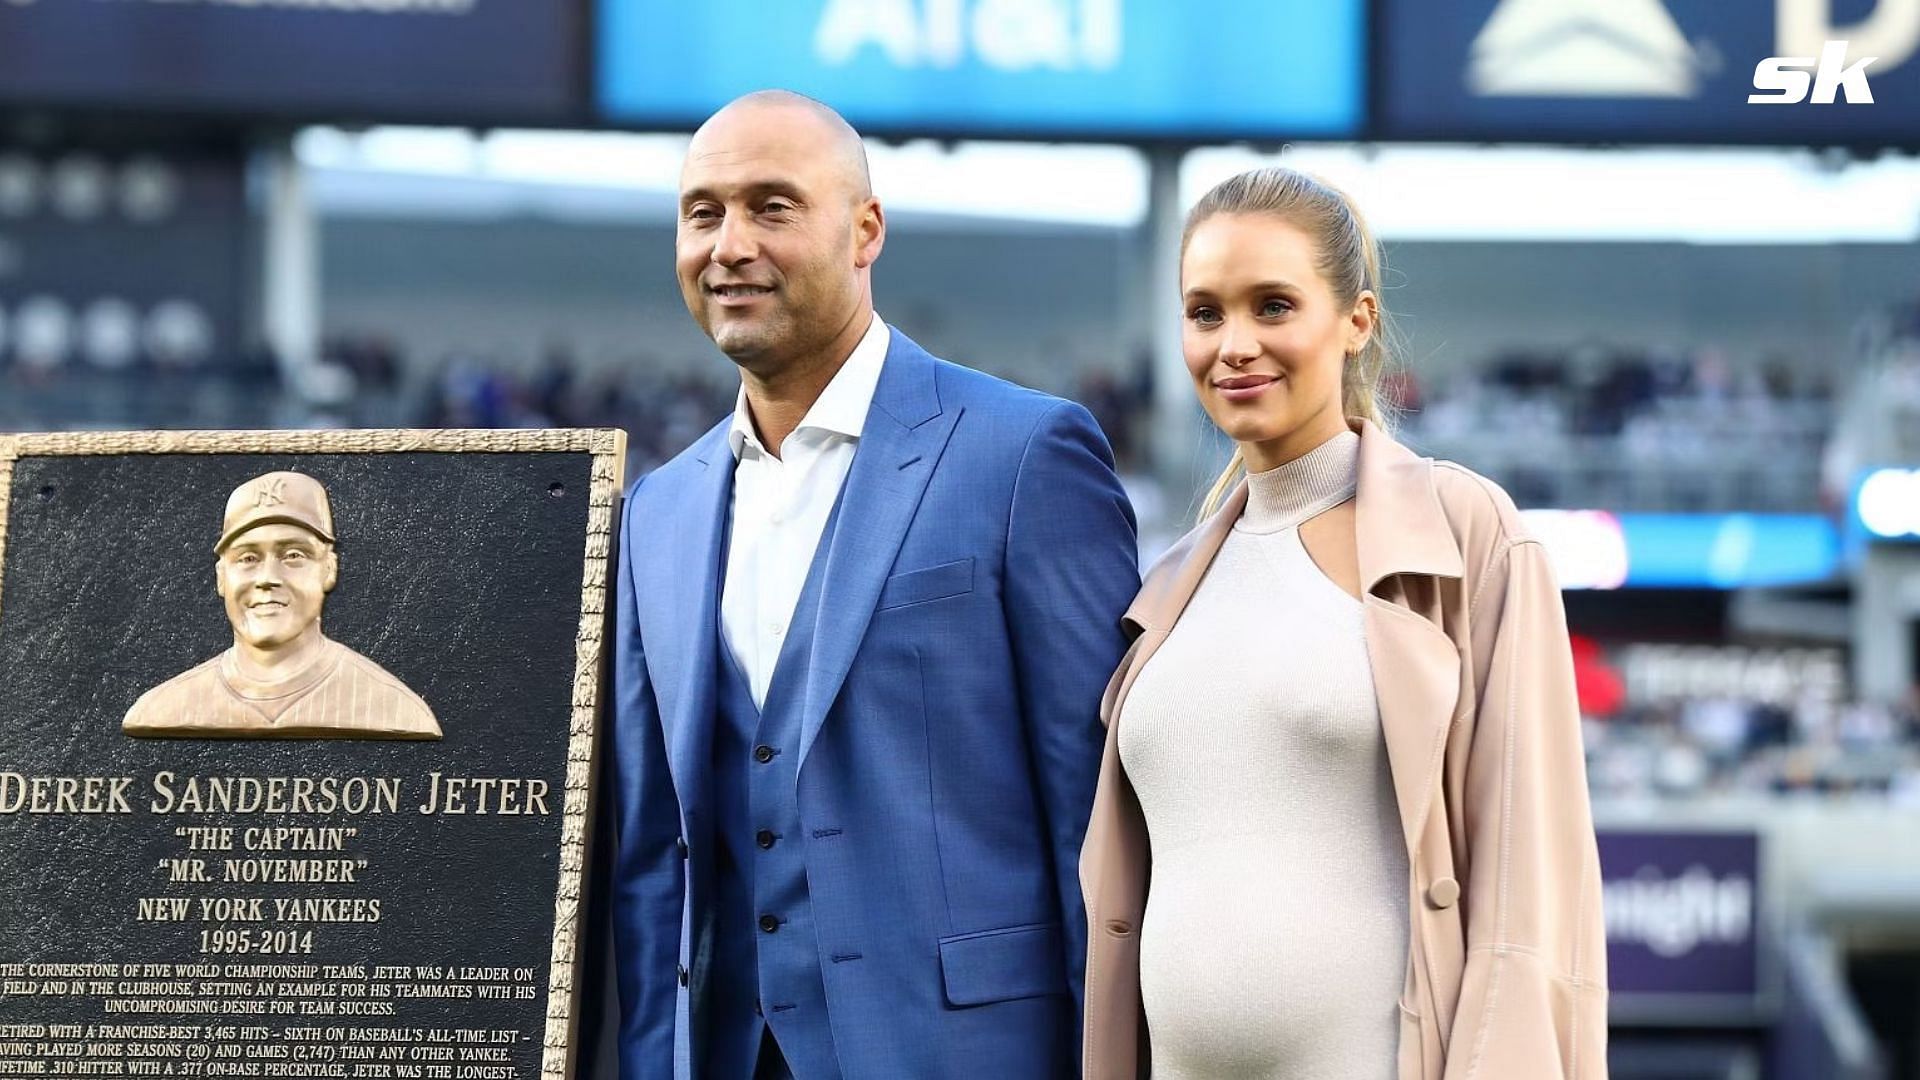 Derek Jeter's close friend once revealed the NY Yankees legend's